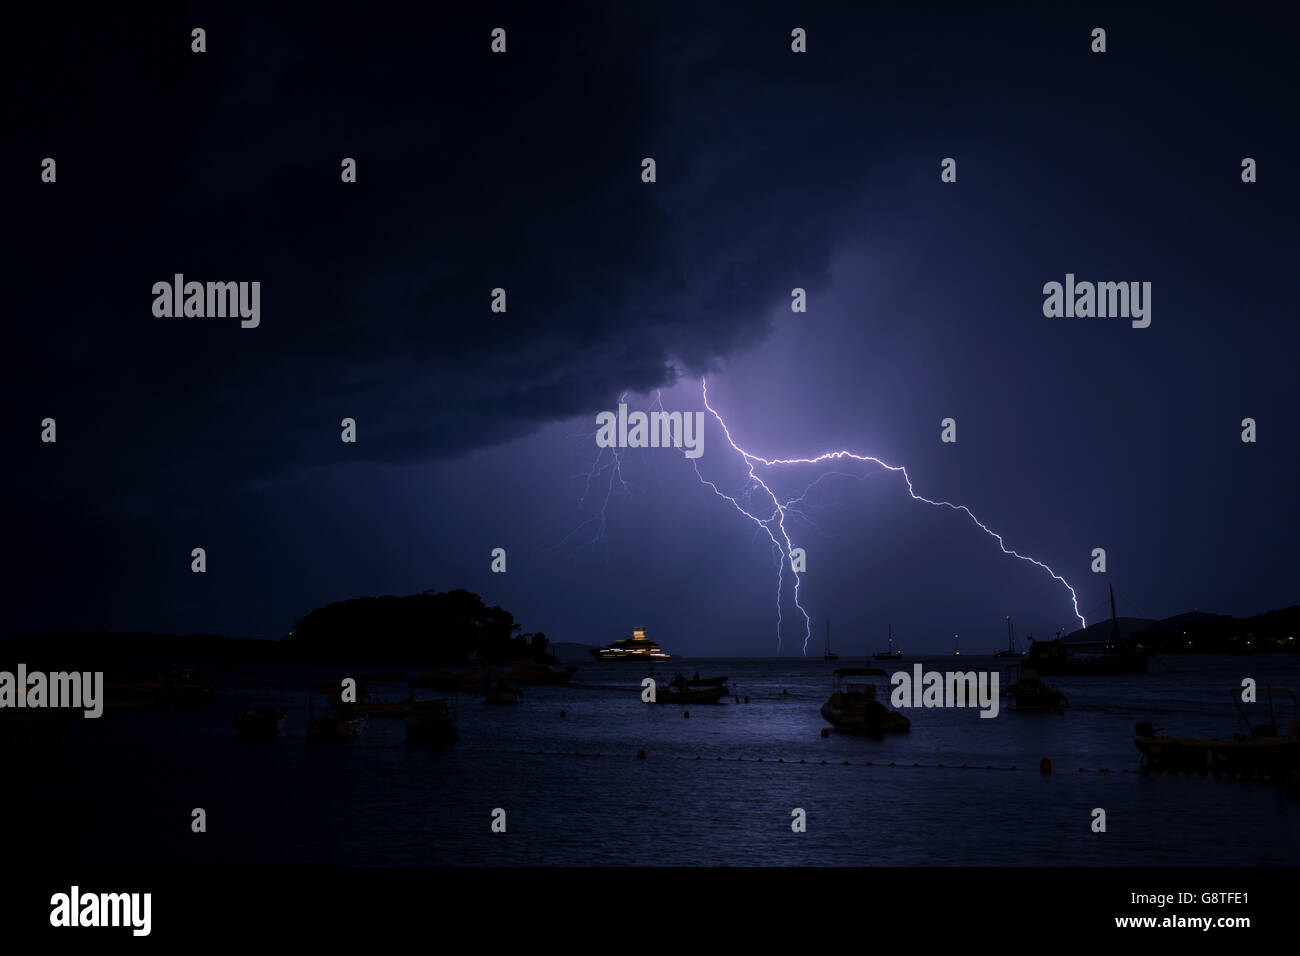 Lightnings in thunderstorm over sea at night Stock Photo